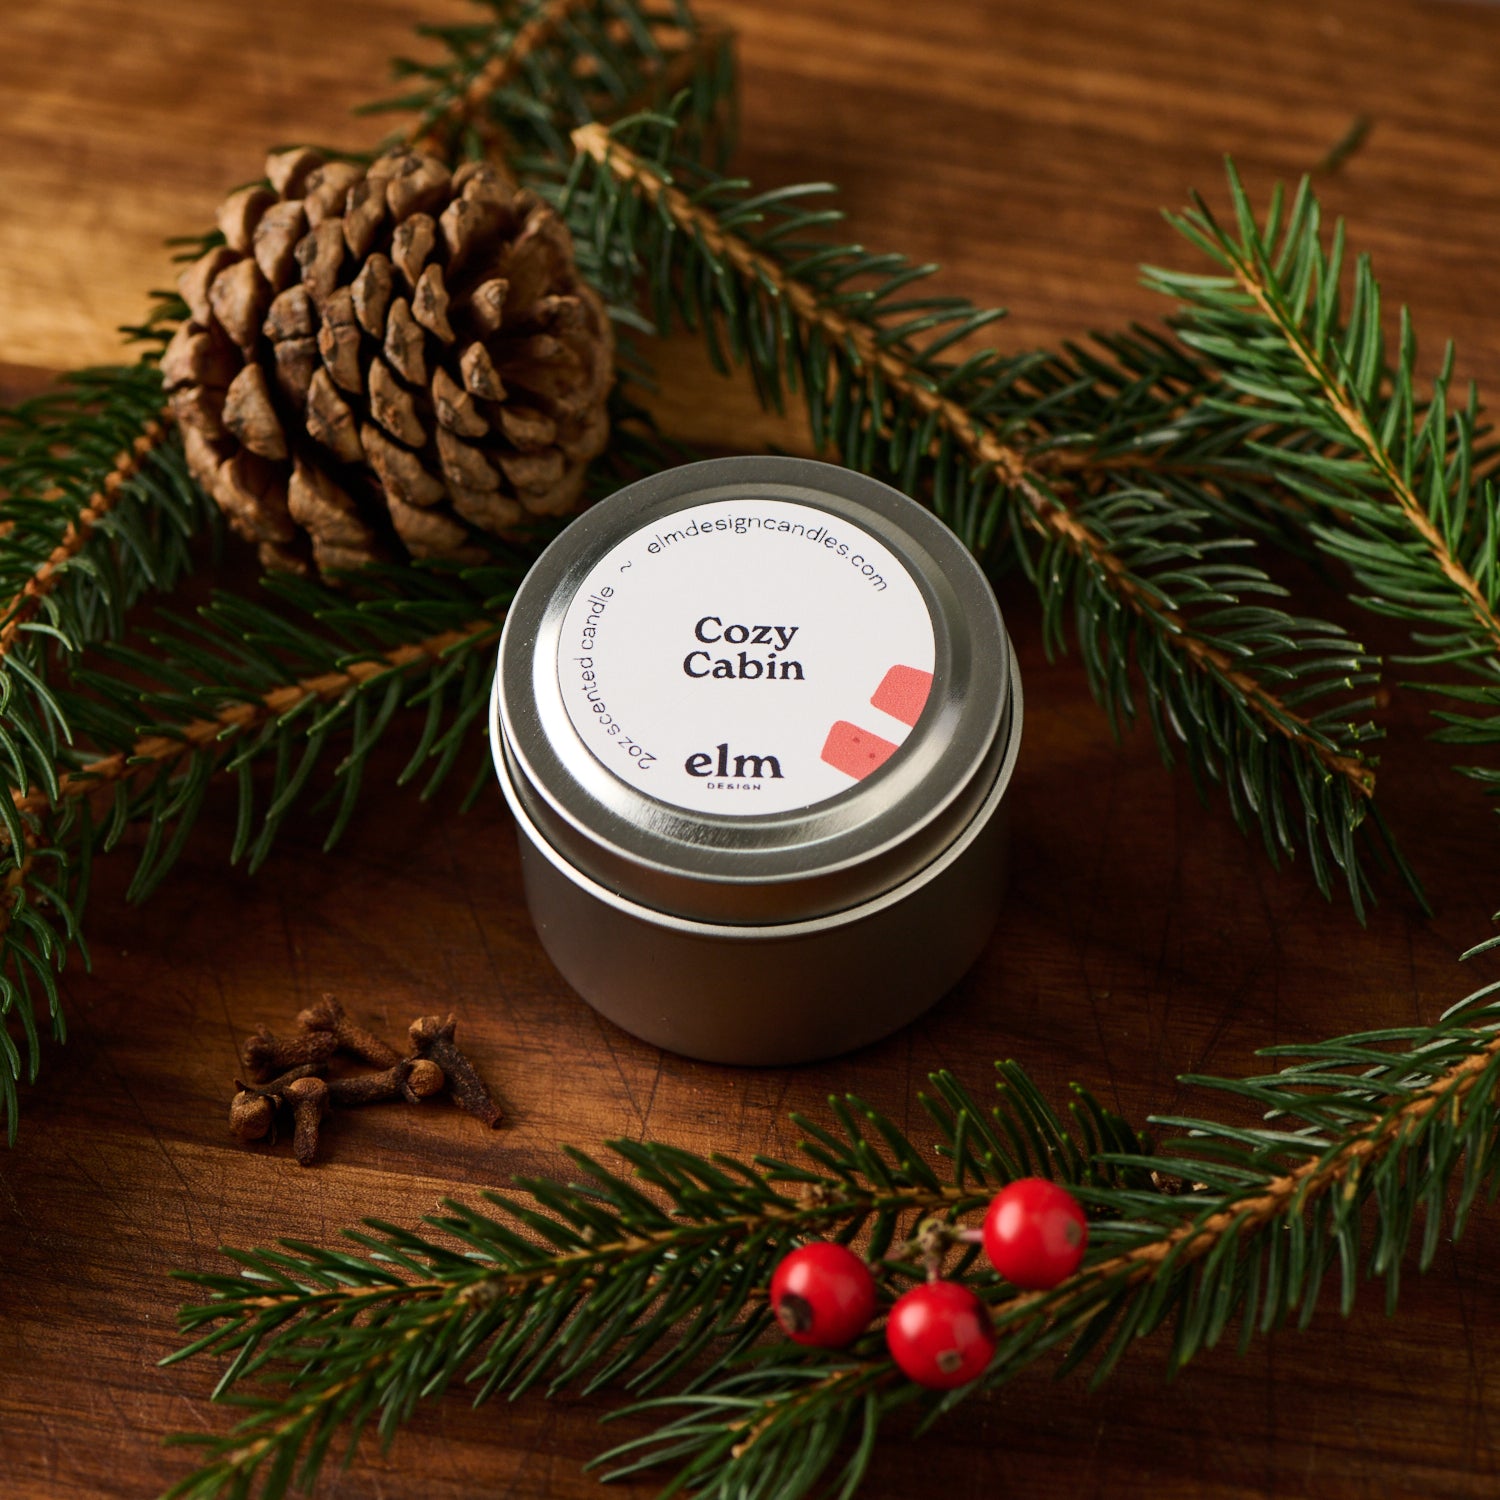 Elm Design's Cozy Cabin scented candle in an 2oz metal tin.